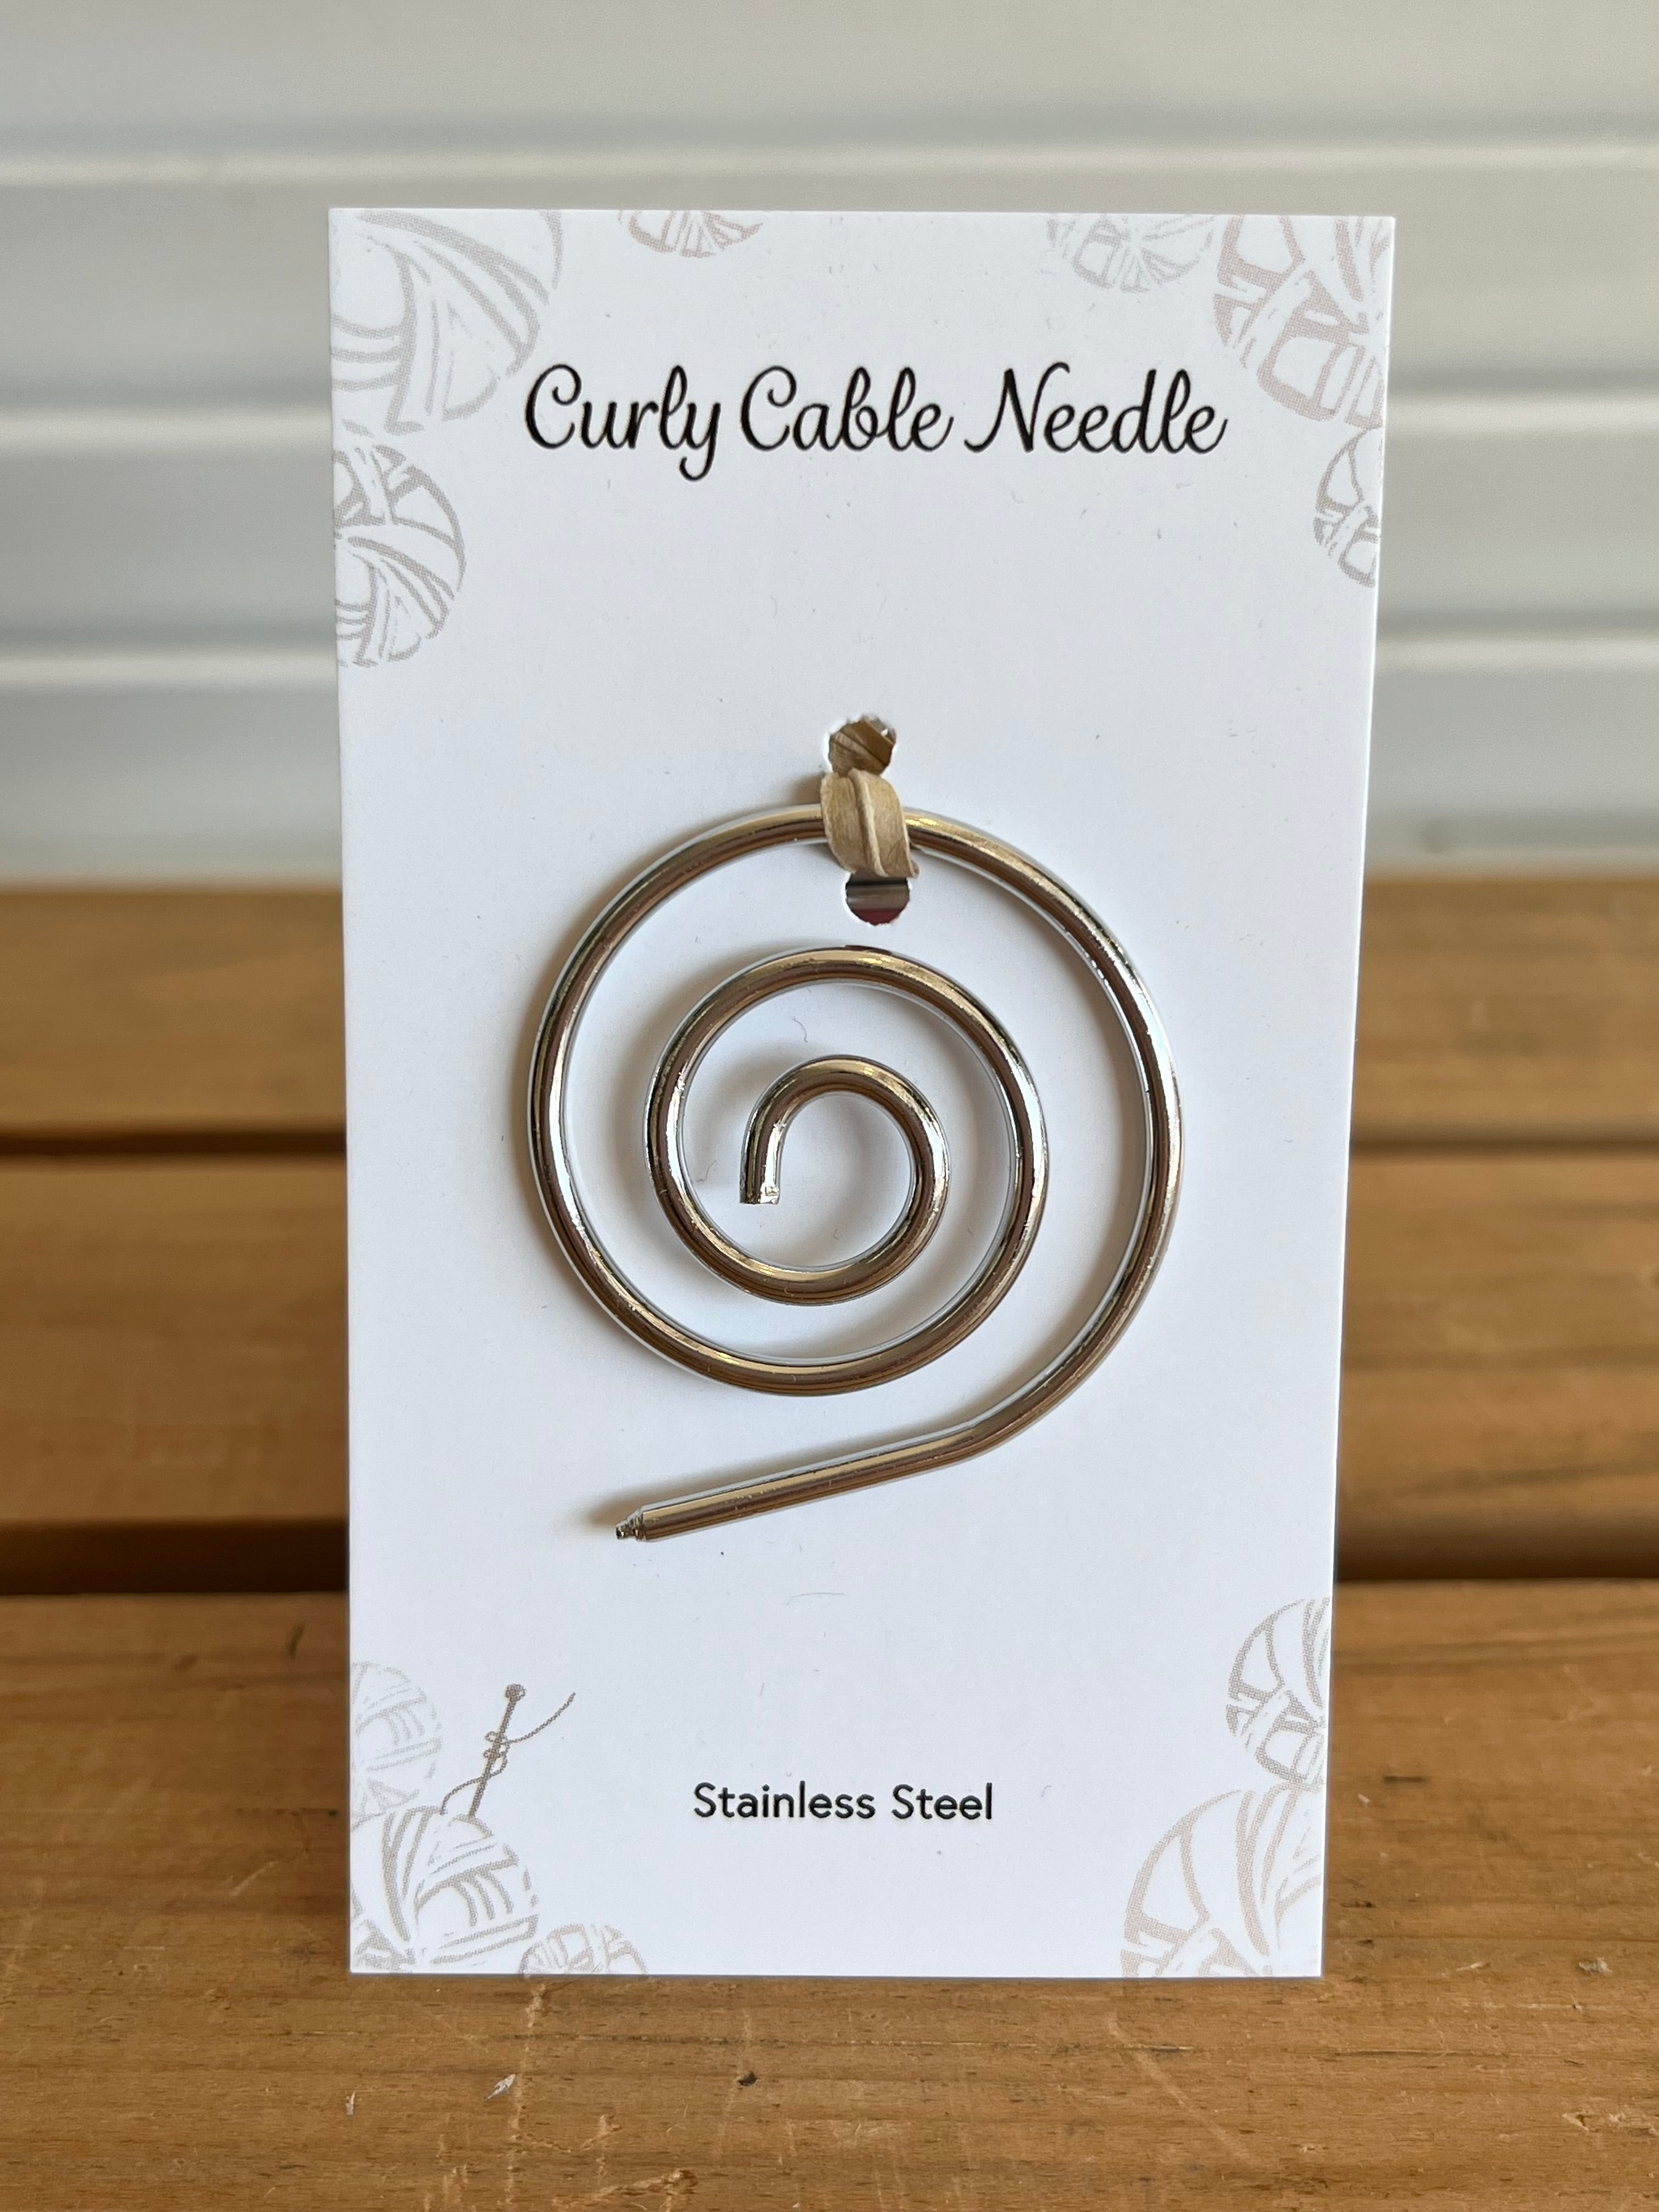 Curly Cable Needle